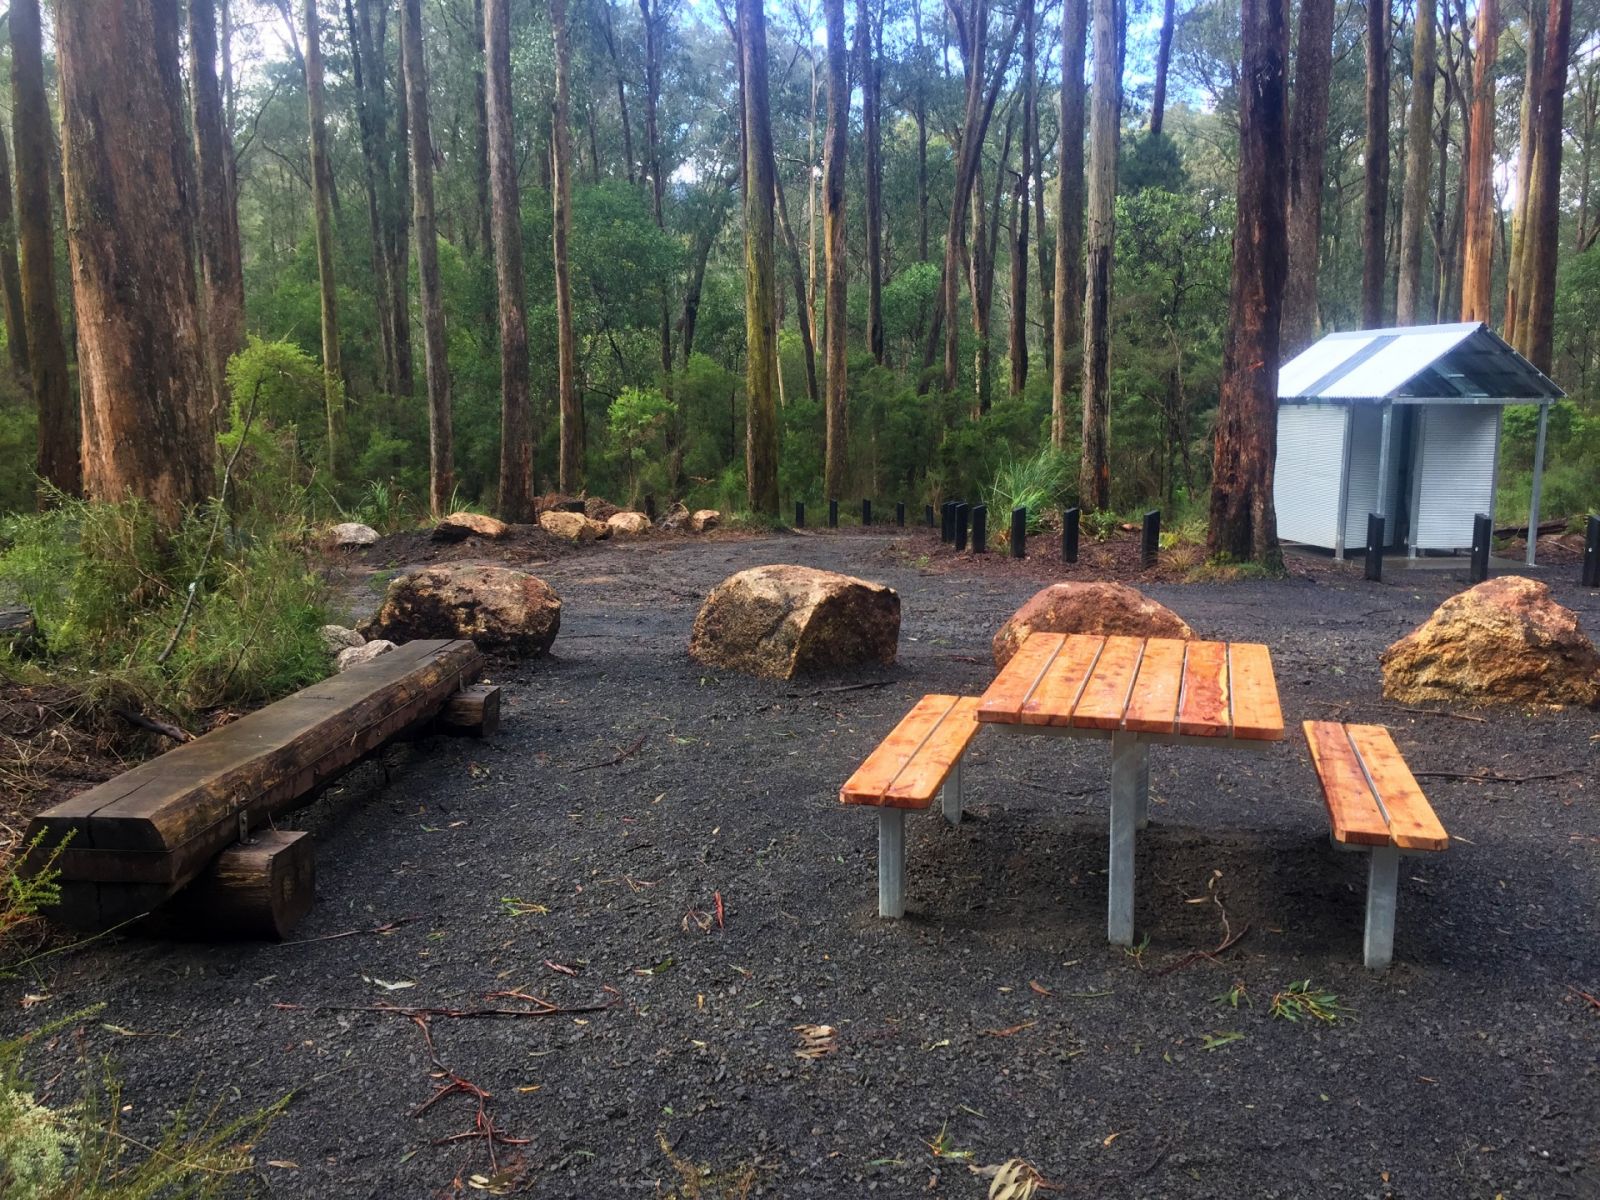 A picnic area with picnic table, log seat and toilets